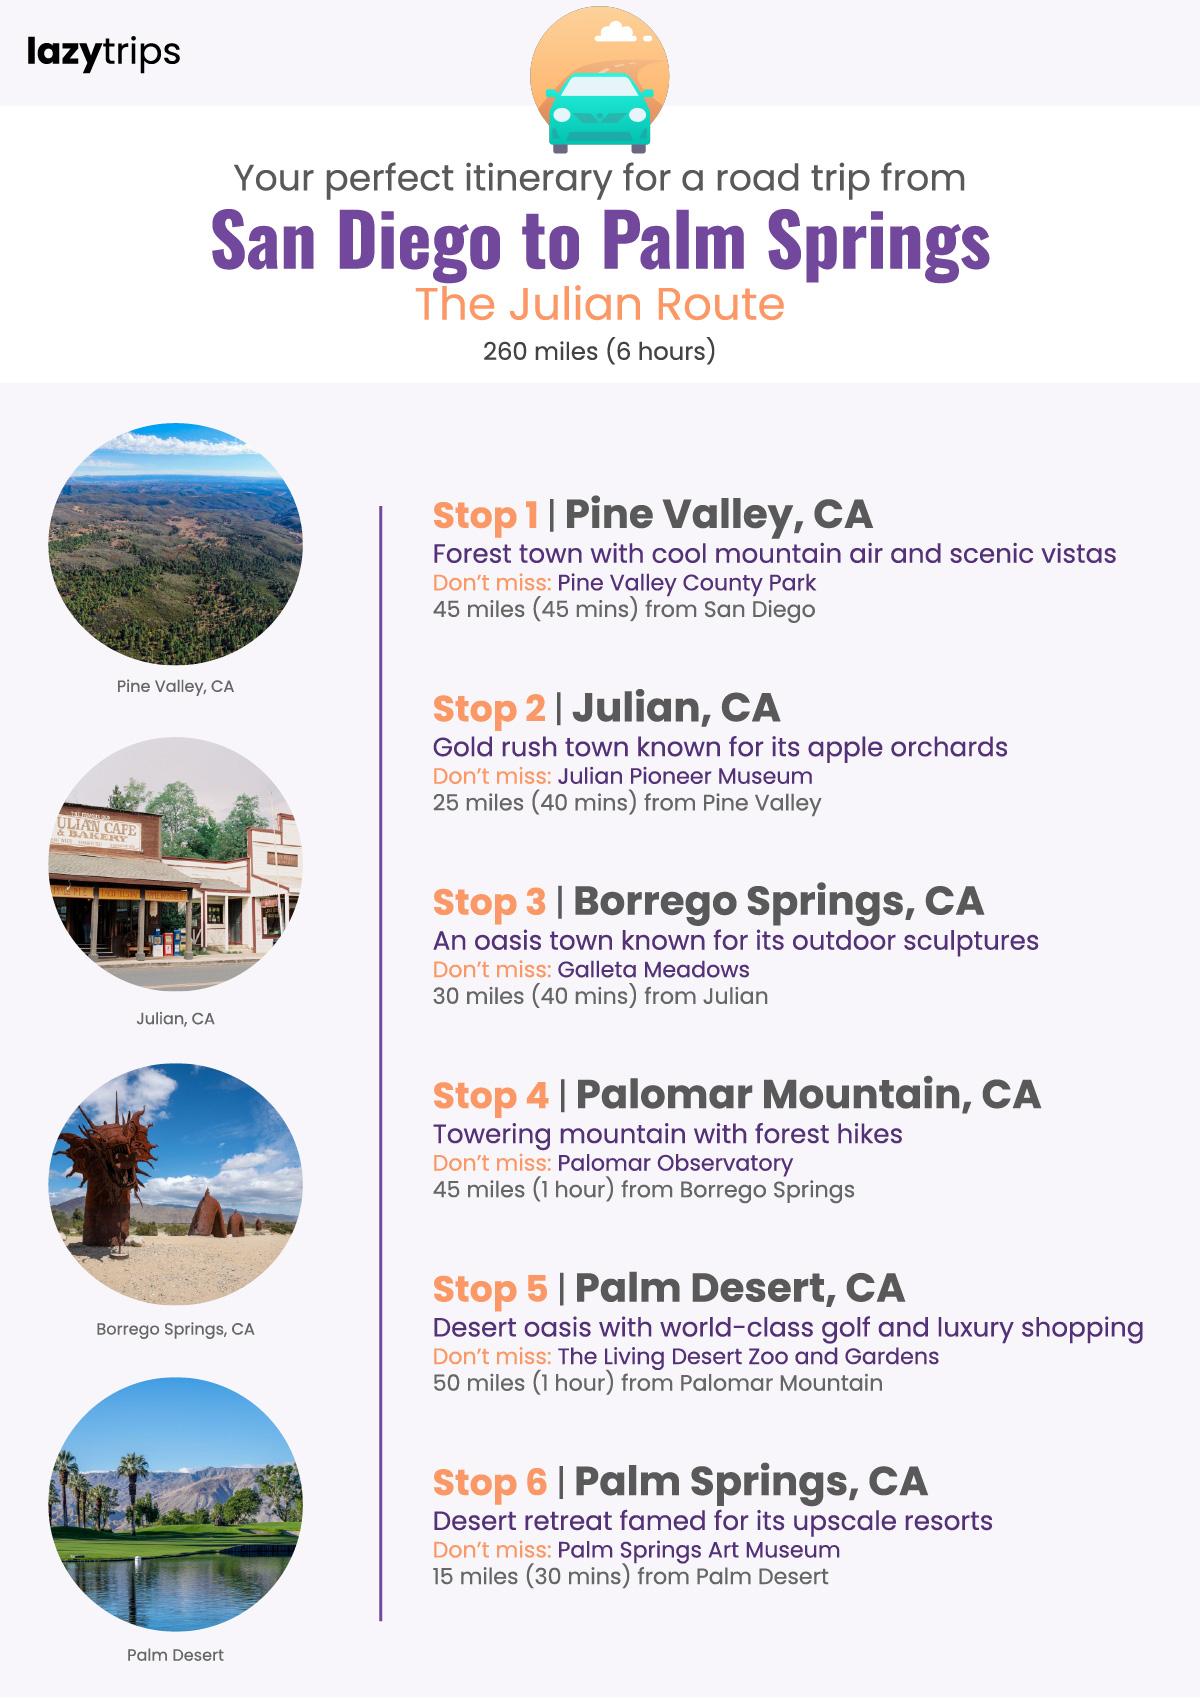 Itinerary for a road trip from San Diego to Palm Springs, stopping in Pine Valley, Julian, Borrego Springs, Palomar Mountain, Pal Desert and Palm Springs